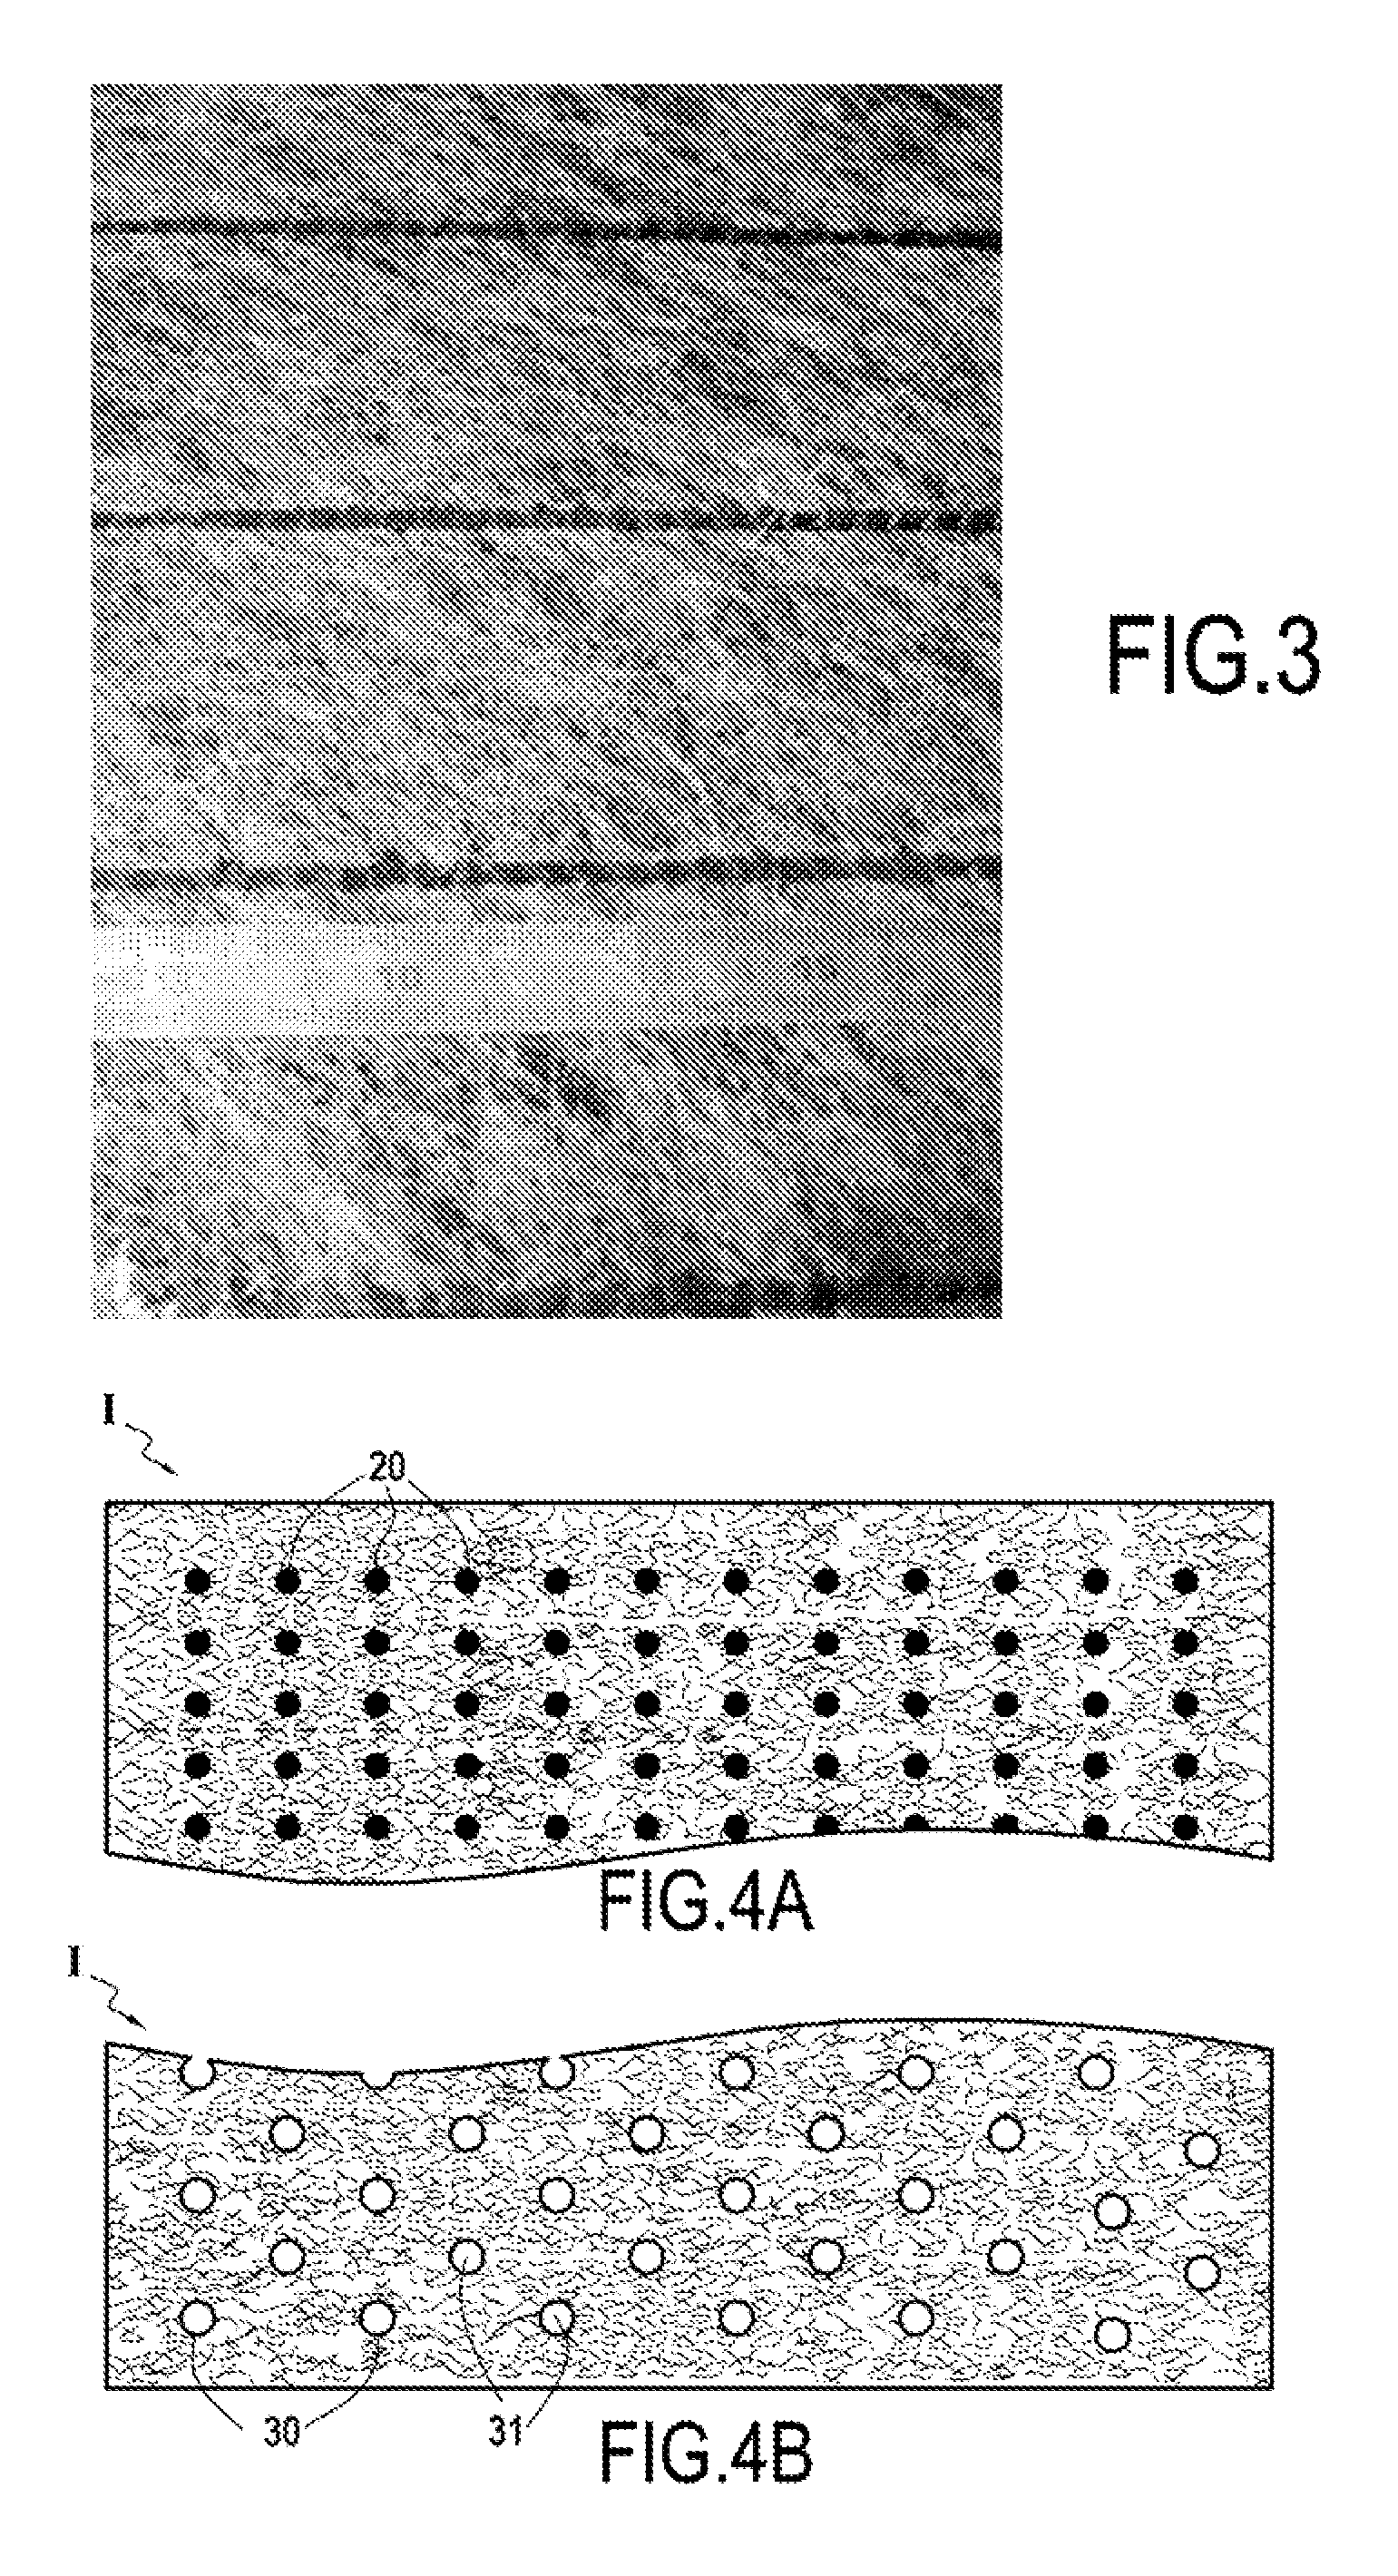 Multiaxial stack rigidly connected by means of weld points applied by means of inserted thermoplastic webs